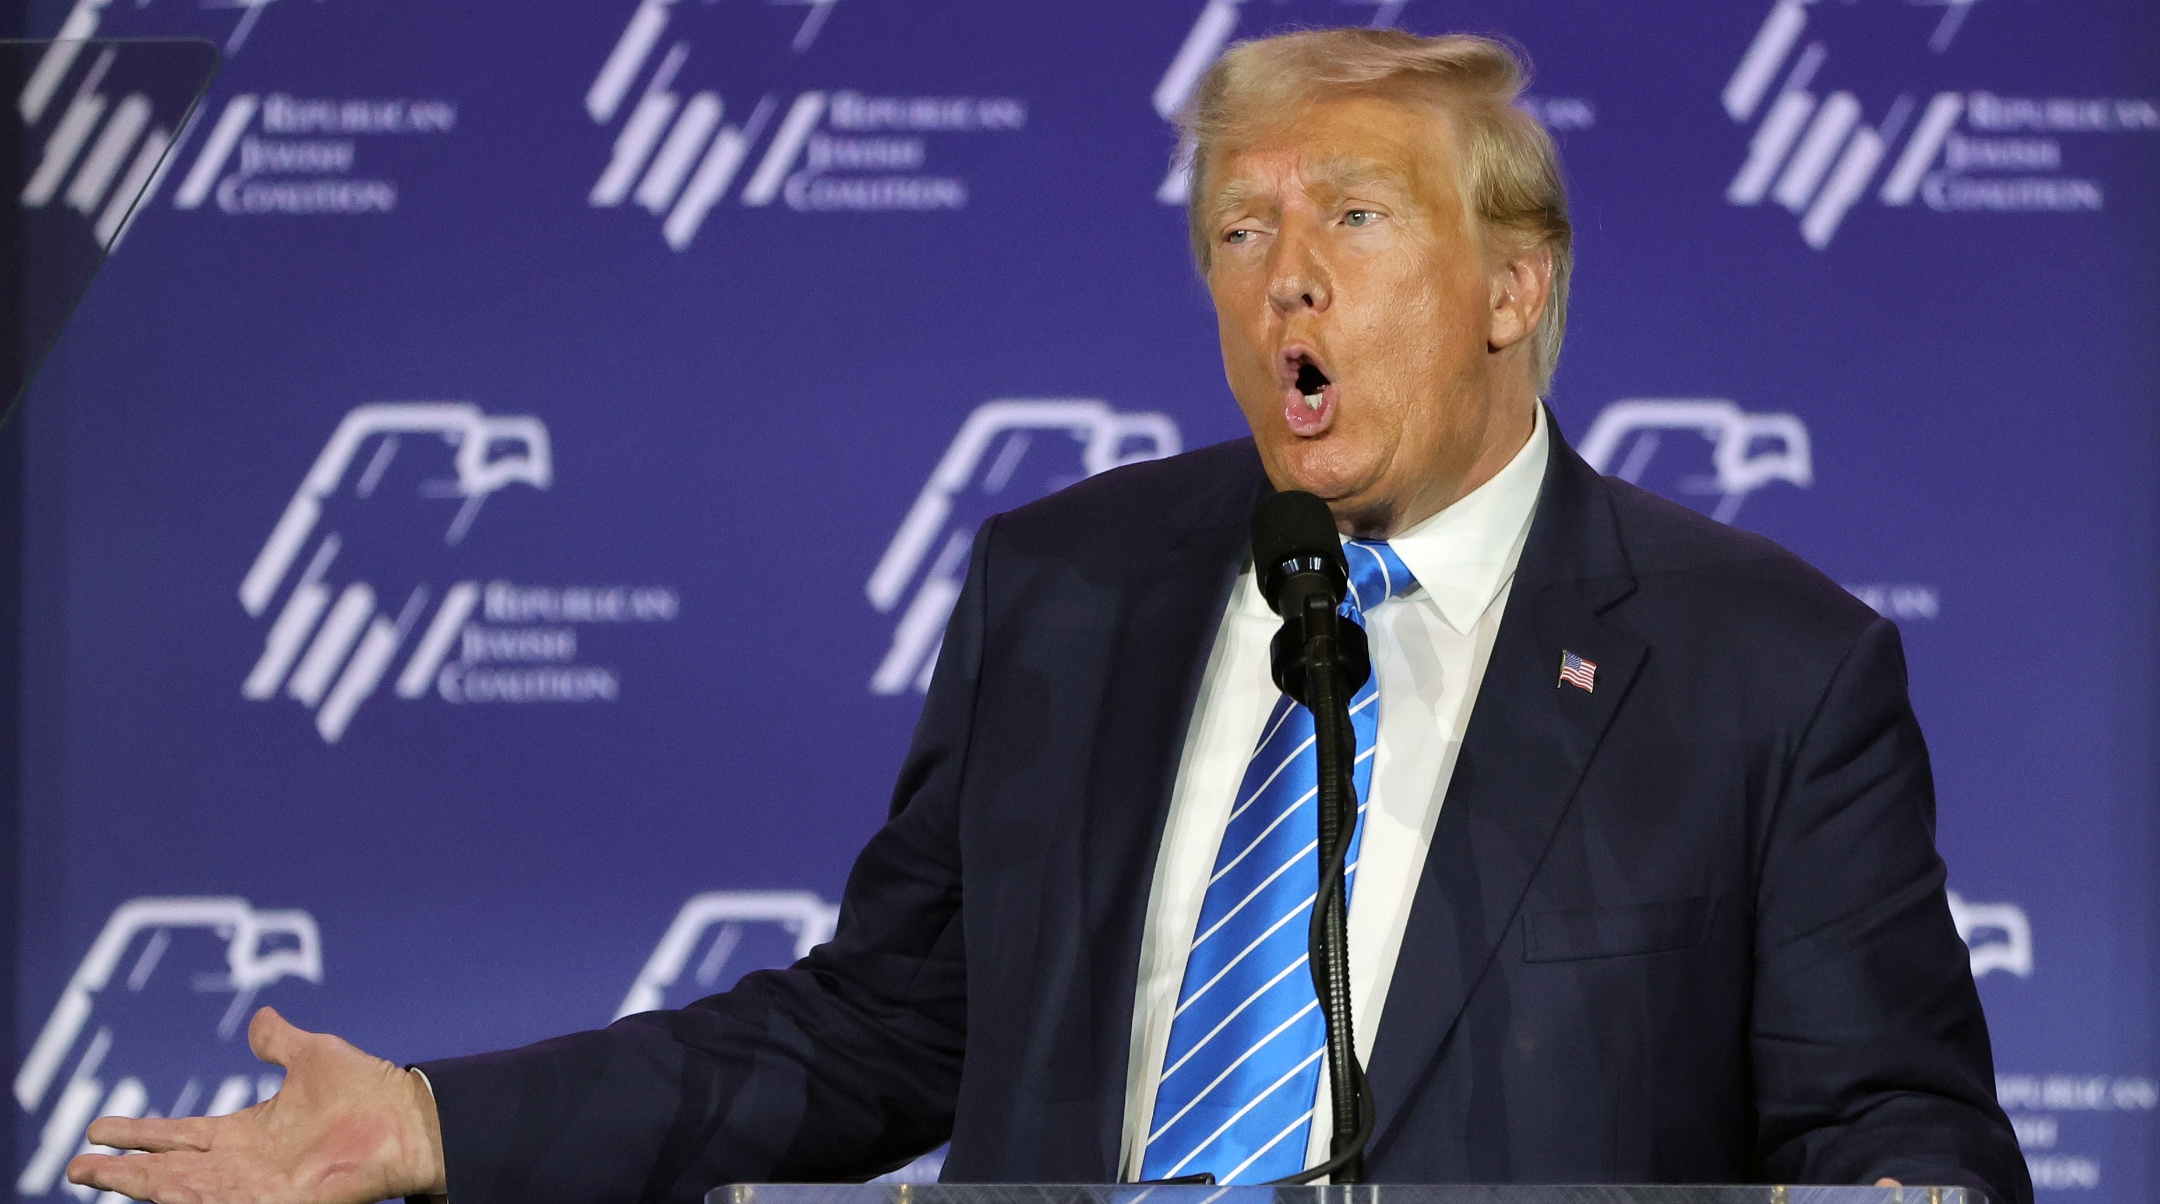 Republican presidential candidate former U.S. President Donald Trump speaks during the Republican Jewish Coalition’s Annual Leadership Summit at The Venetian Resort Las Vegas, Oct. 28, 2023. (Ethan Miller/Getty Images)